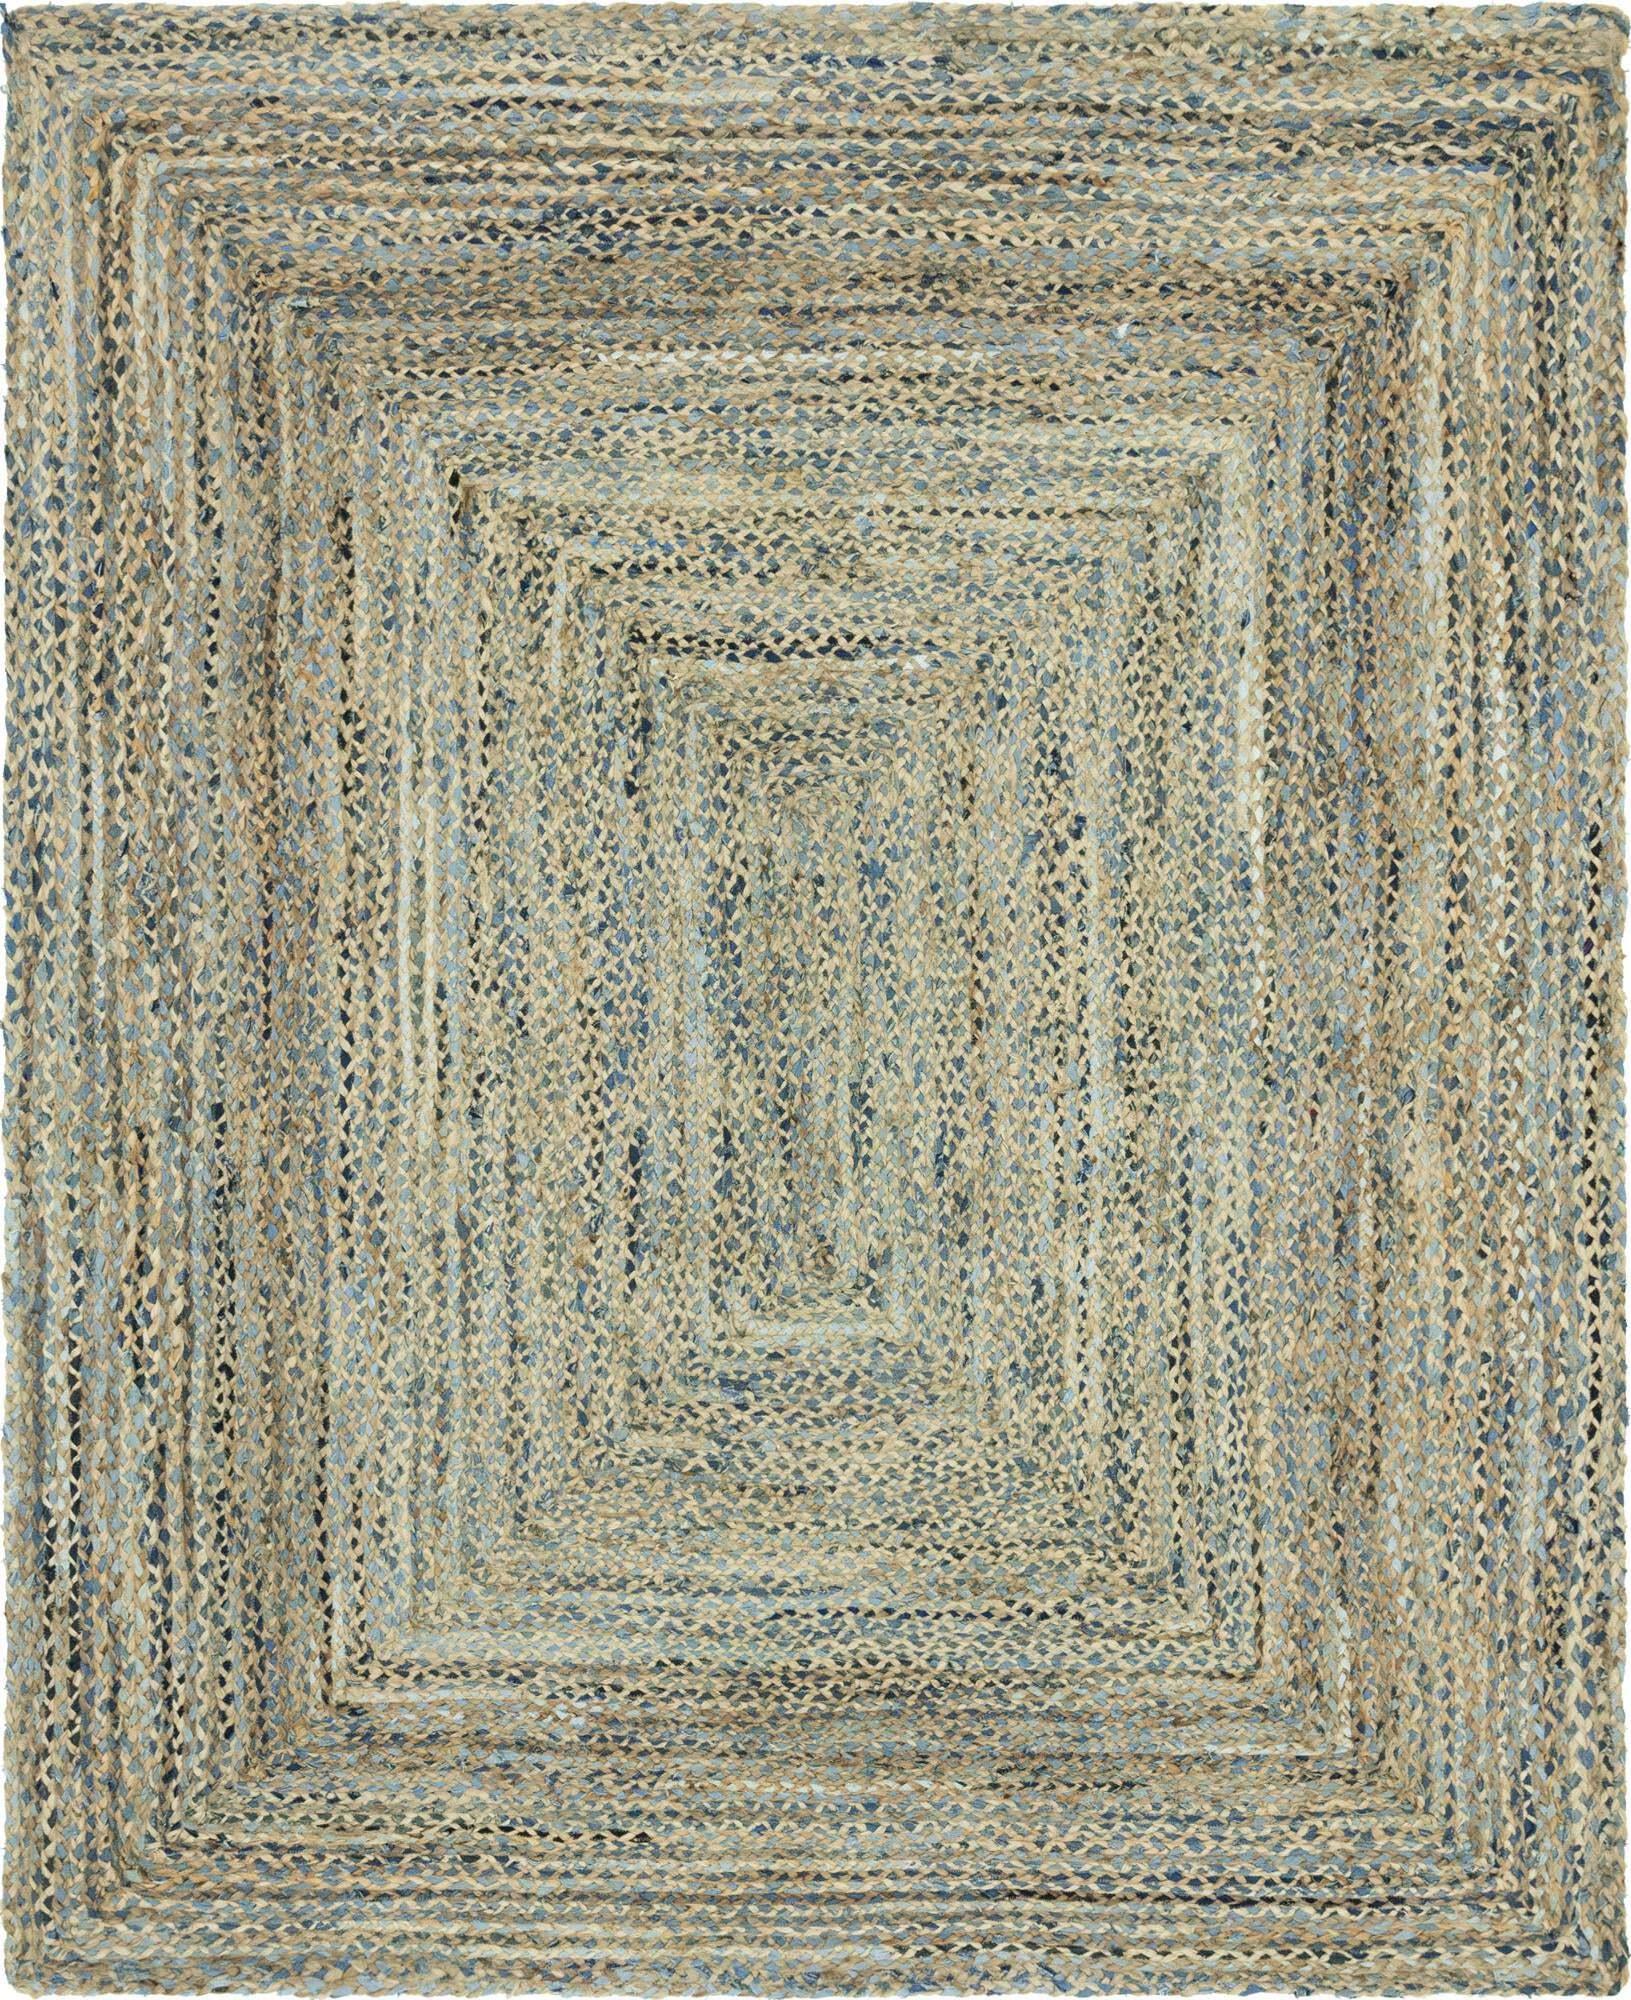 Unique Loom Indoor Rugs - Braided Chindi Abstract Rectangular 8x10 Rug Blue & Tan